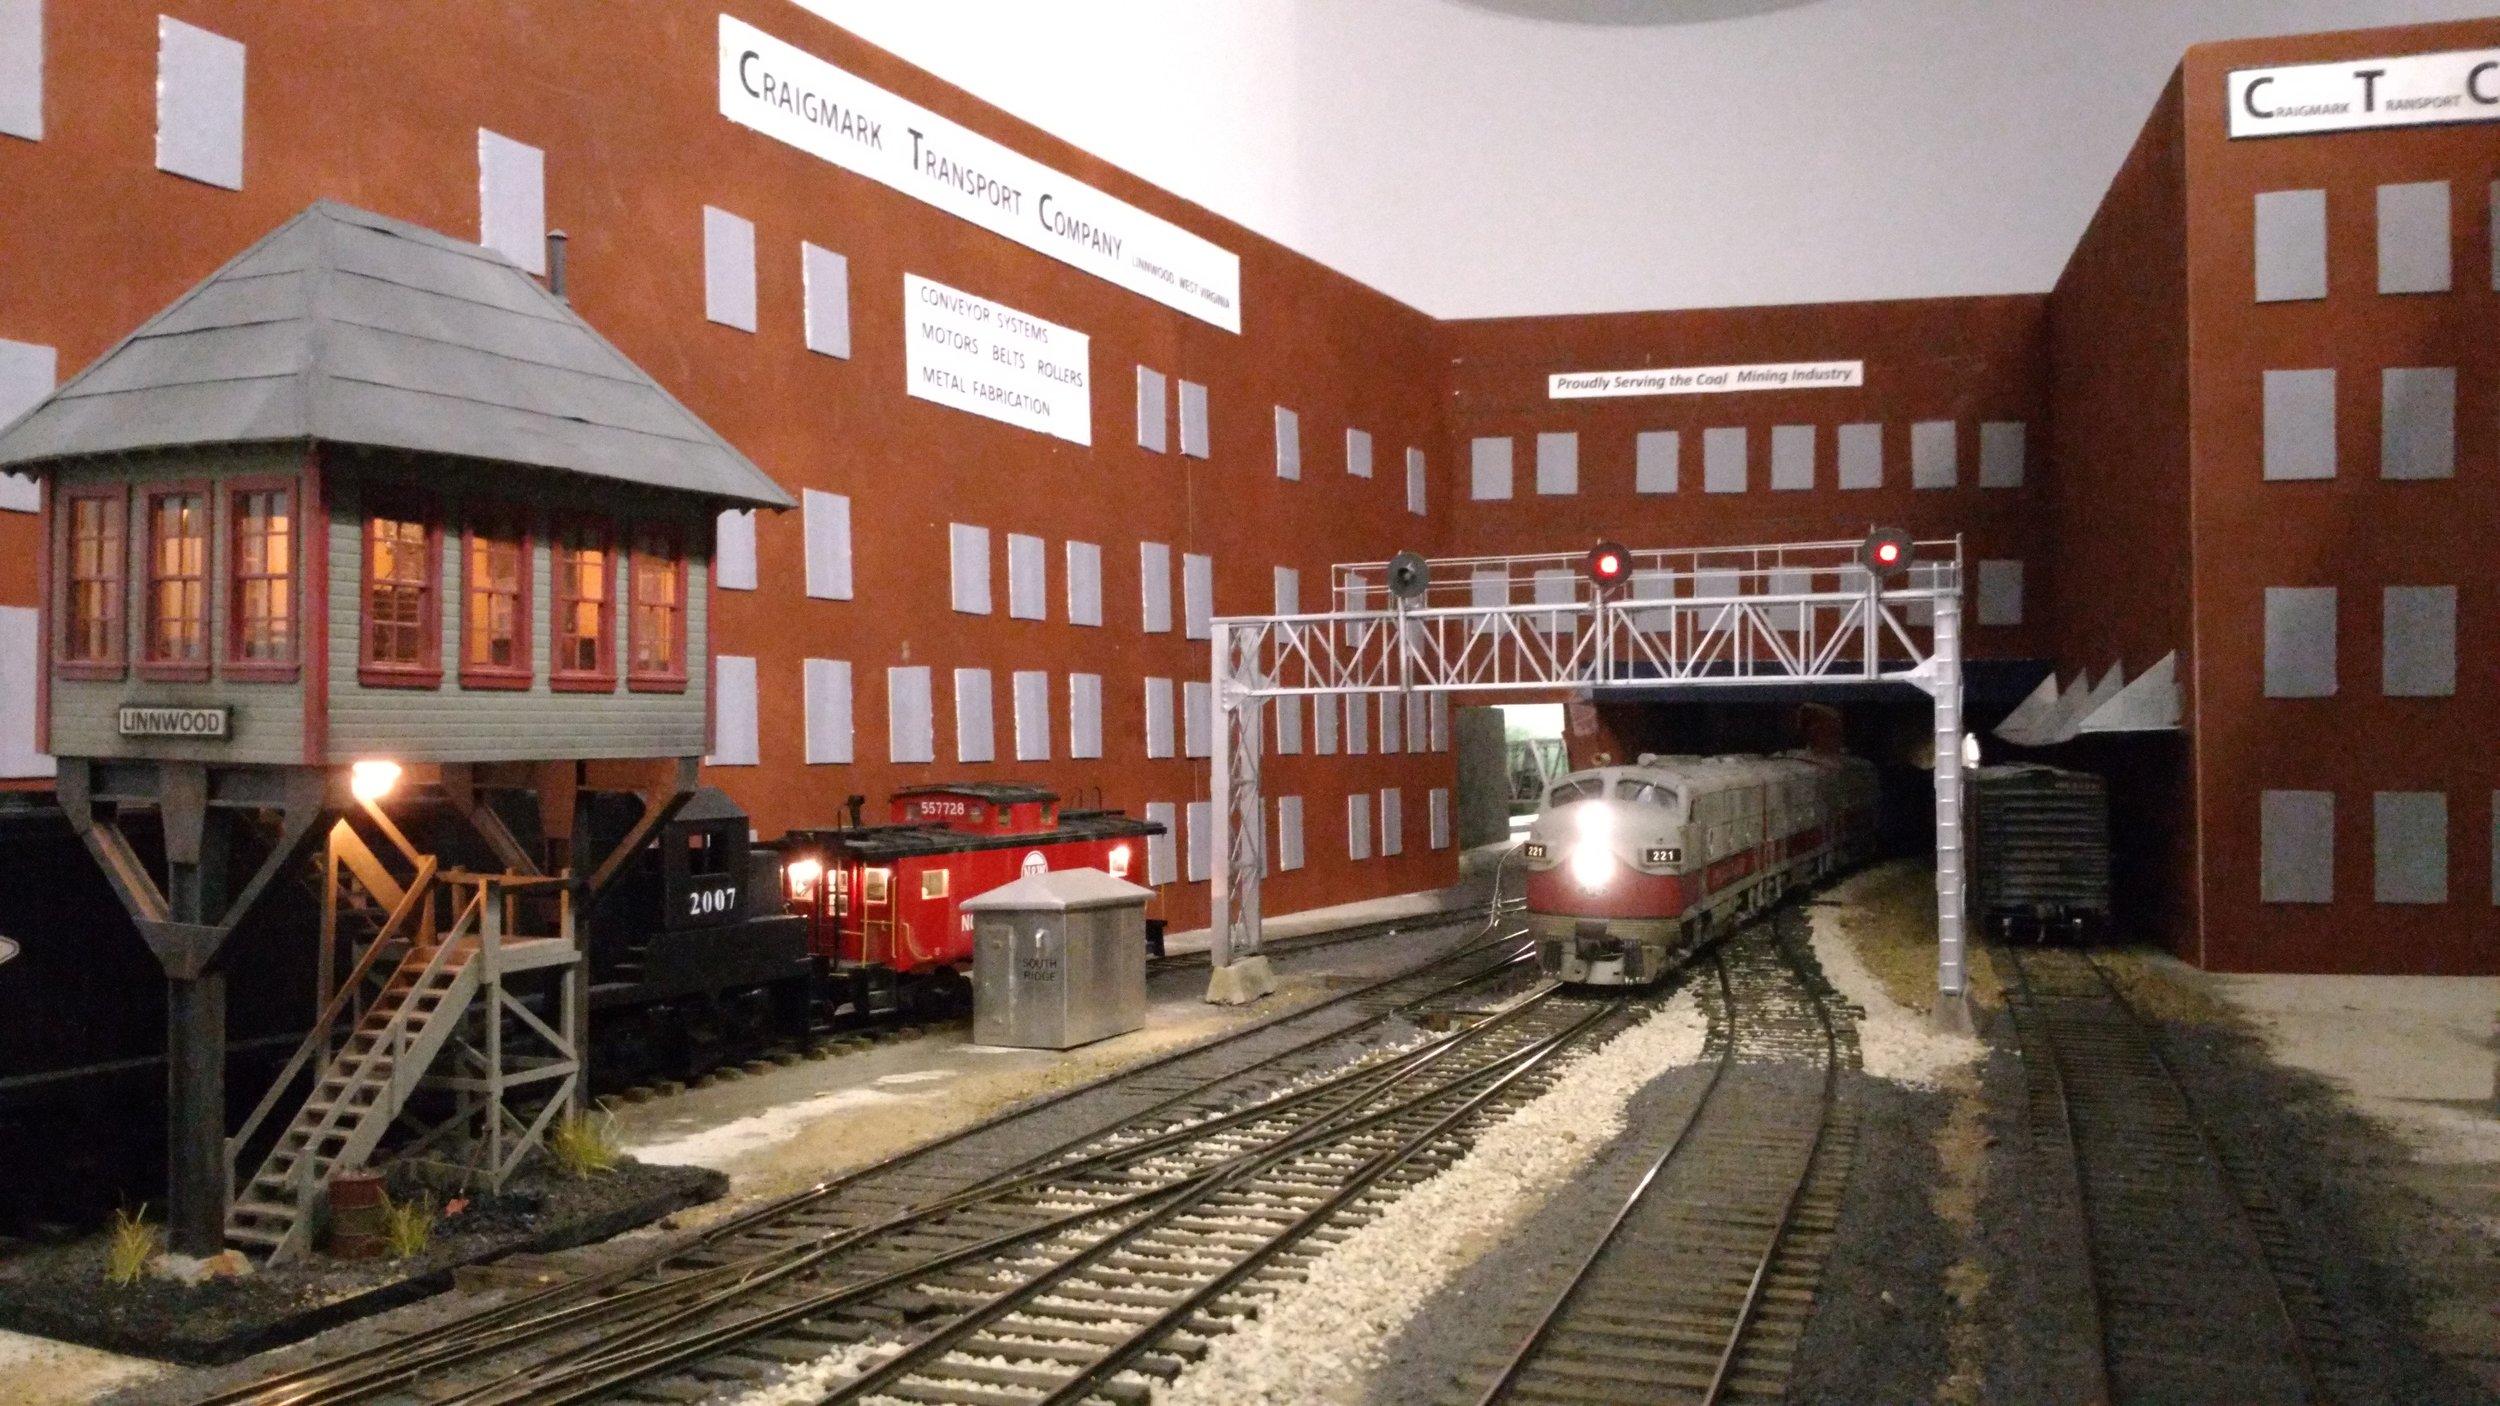  Finally. The train enters Linnwood, passing under a mock-up of Craigmark Transport Corp. (CTC&nbsp; &nbsp;:) This is the town where it's always raining,...and lightening, thanks again to the ingenuity of Bob Sobol. 